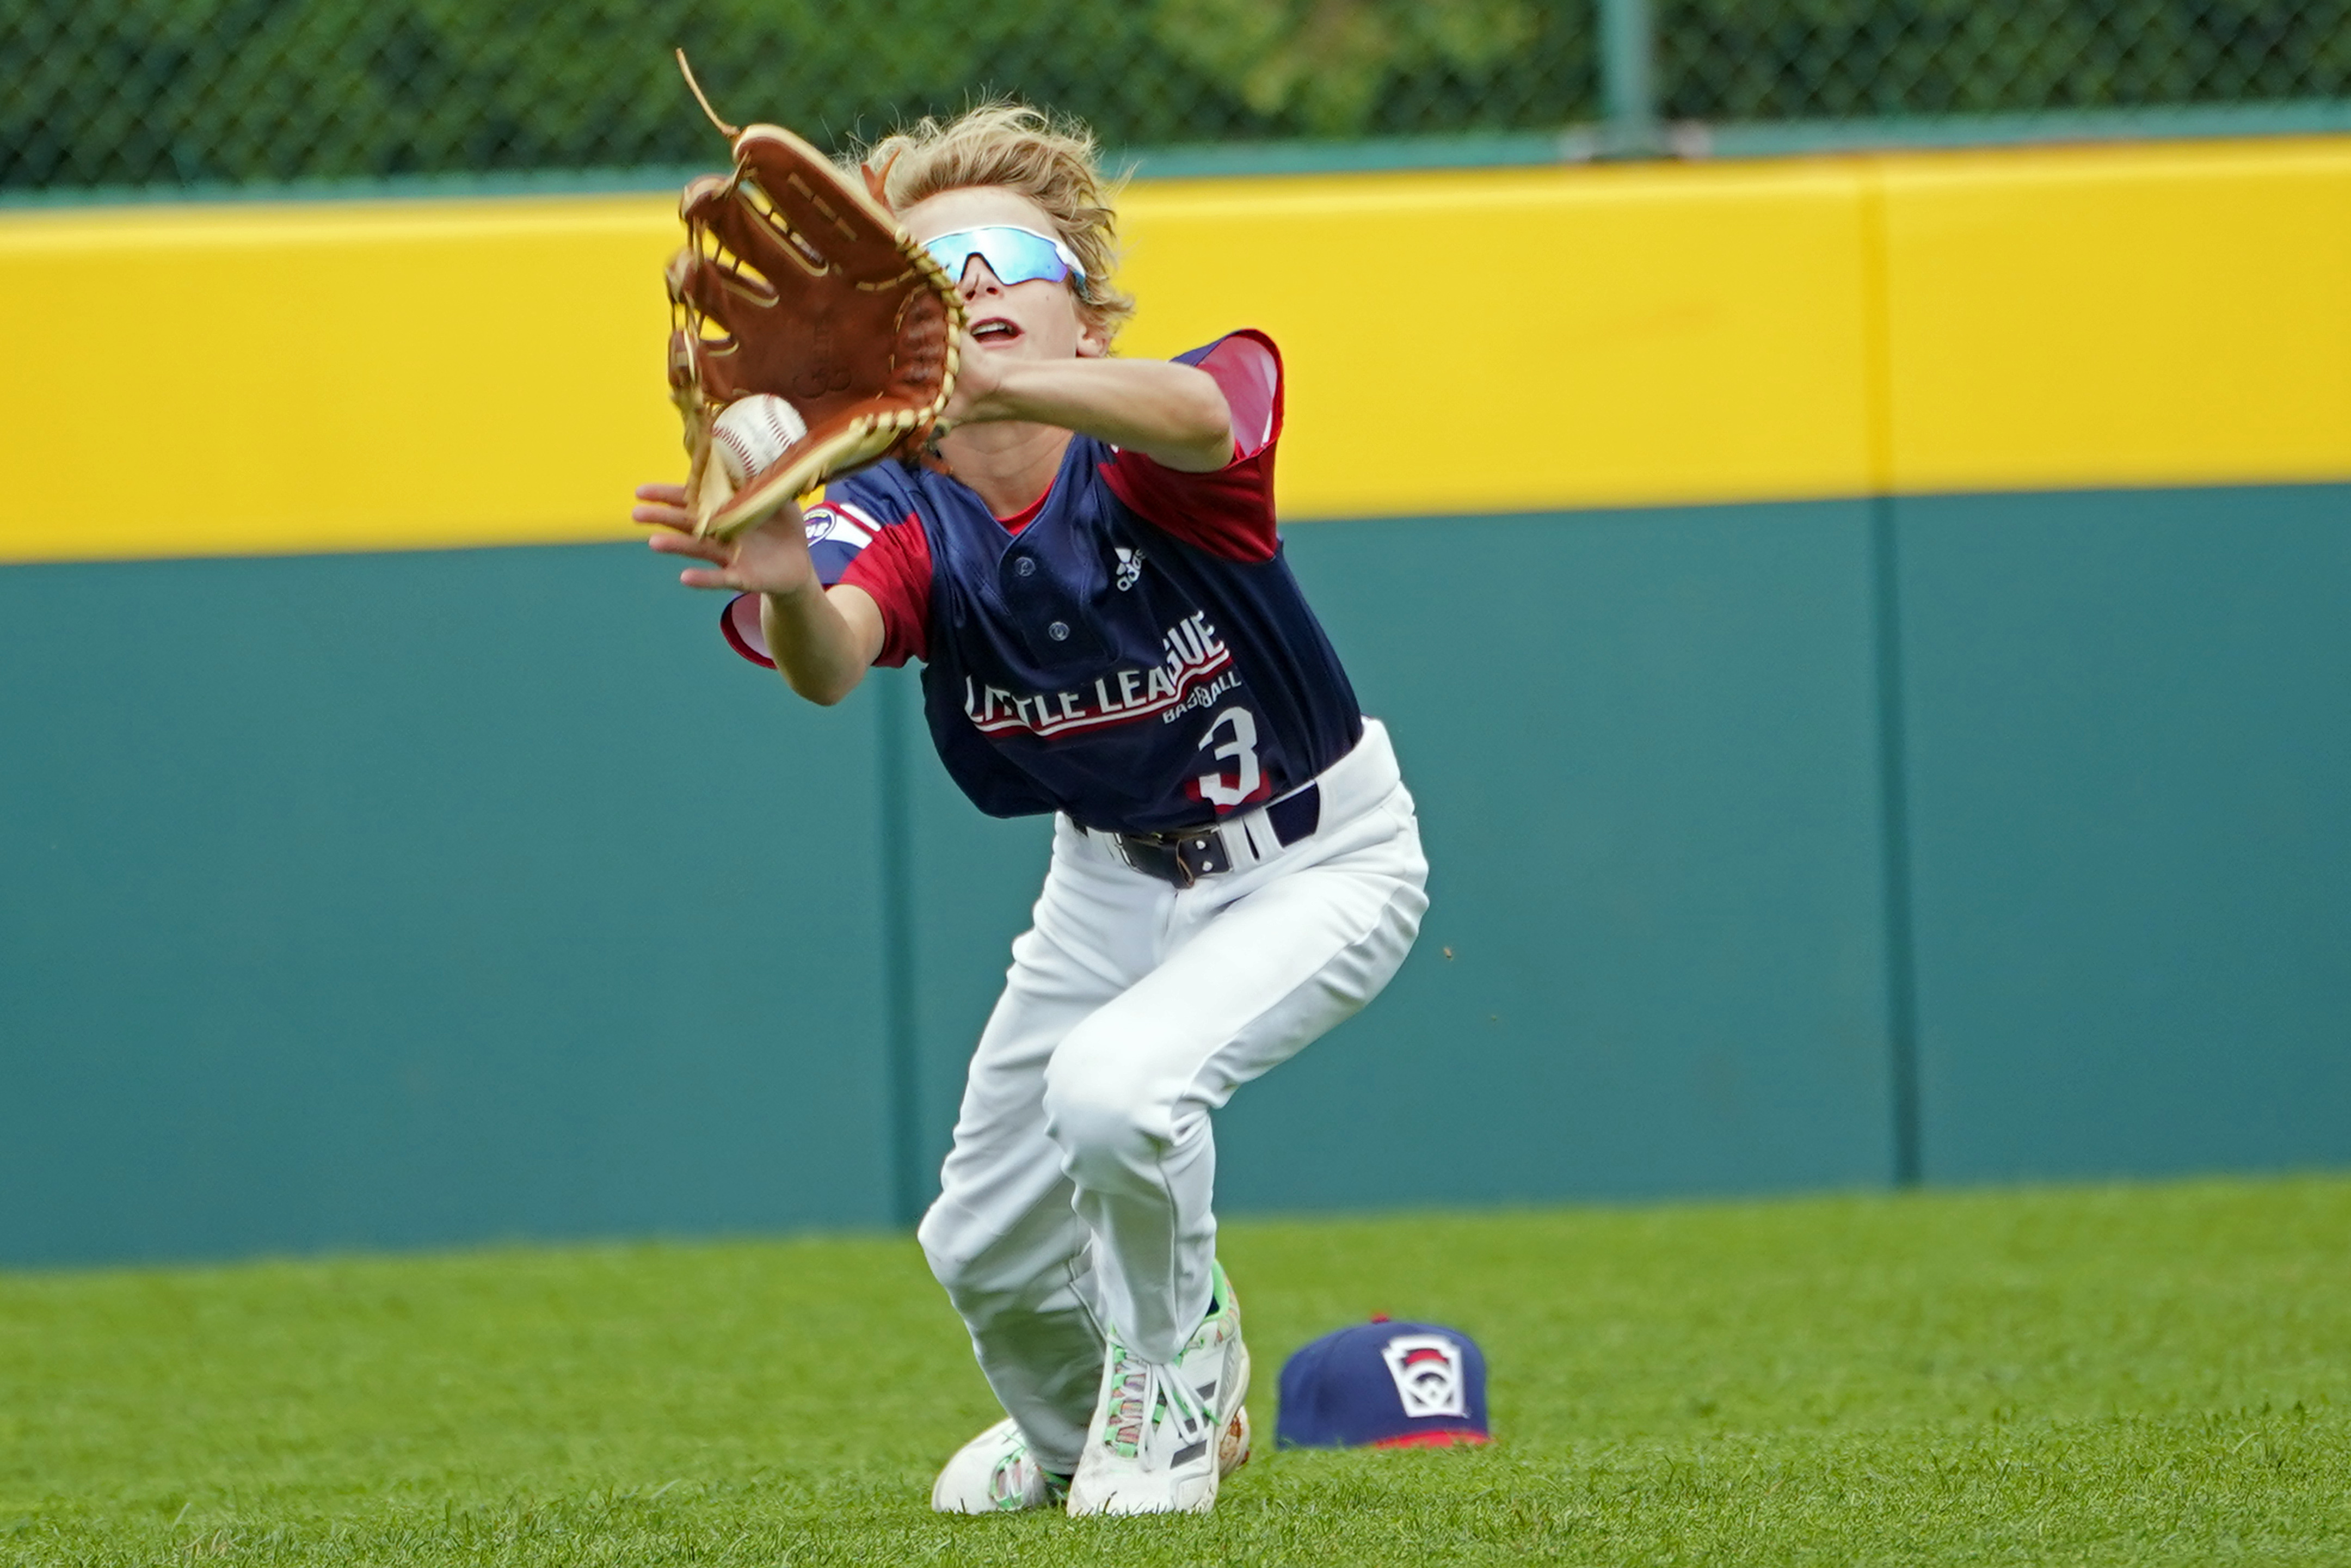 Hastings Baseball wins first game at Little League World Series